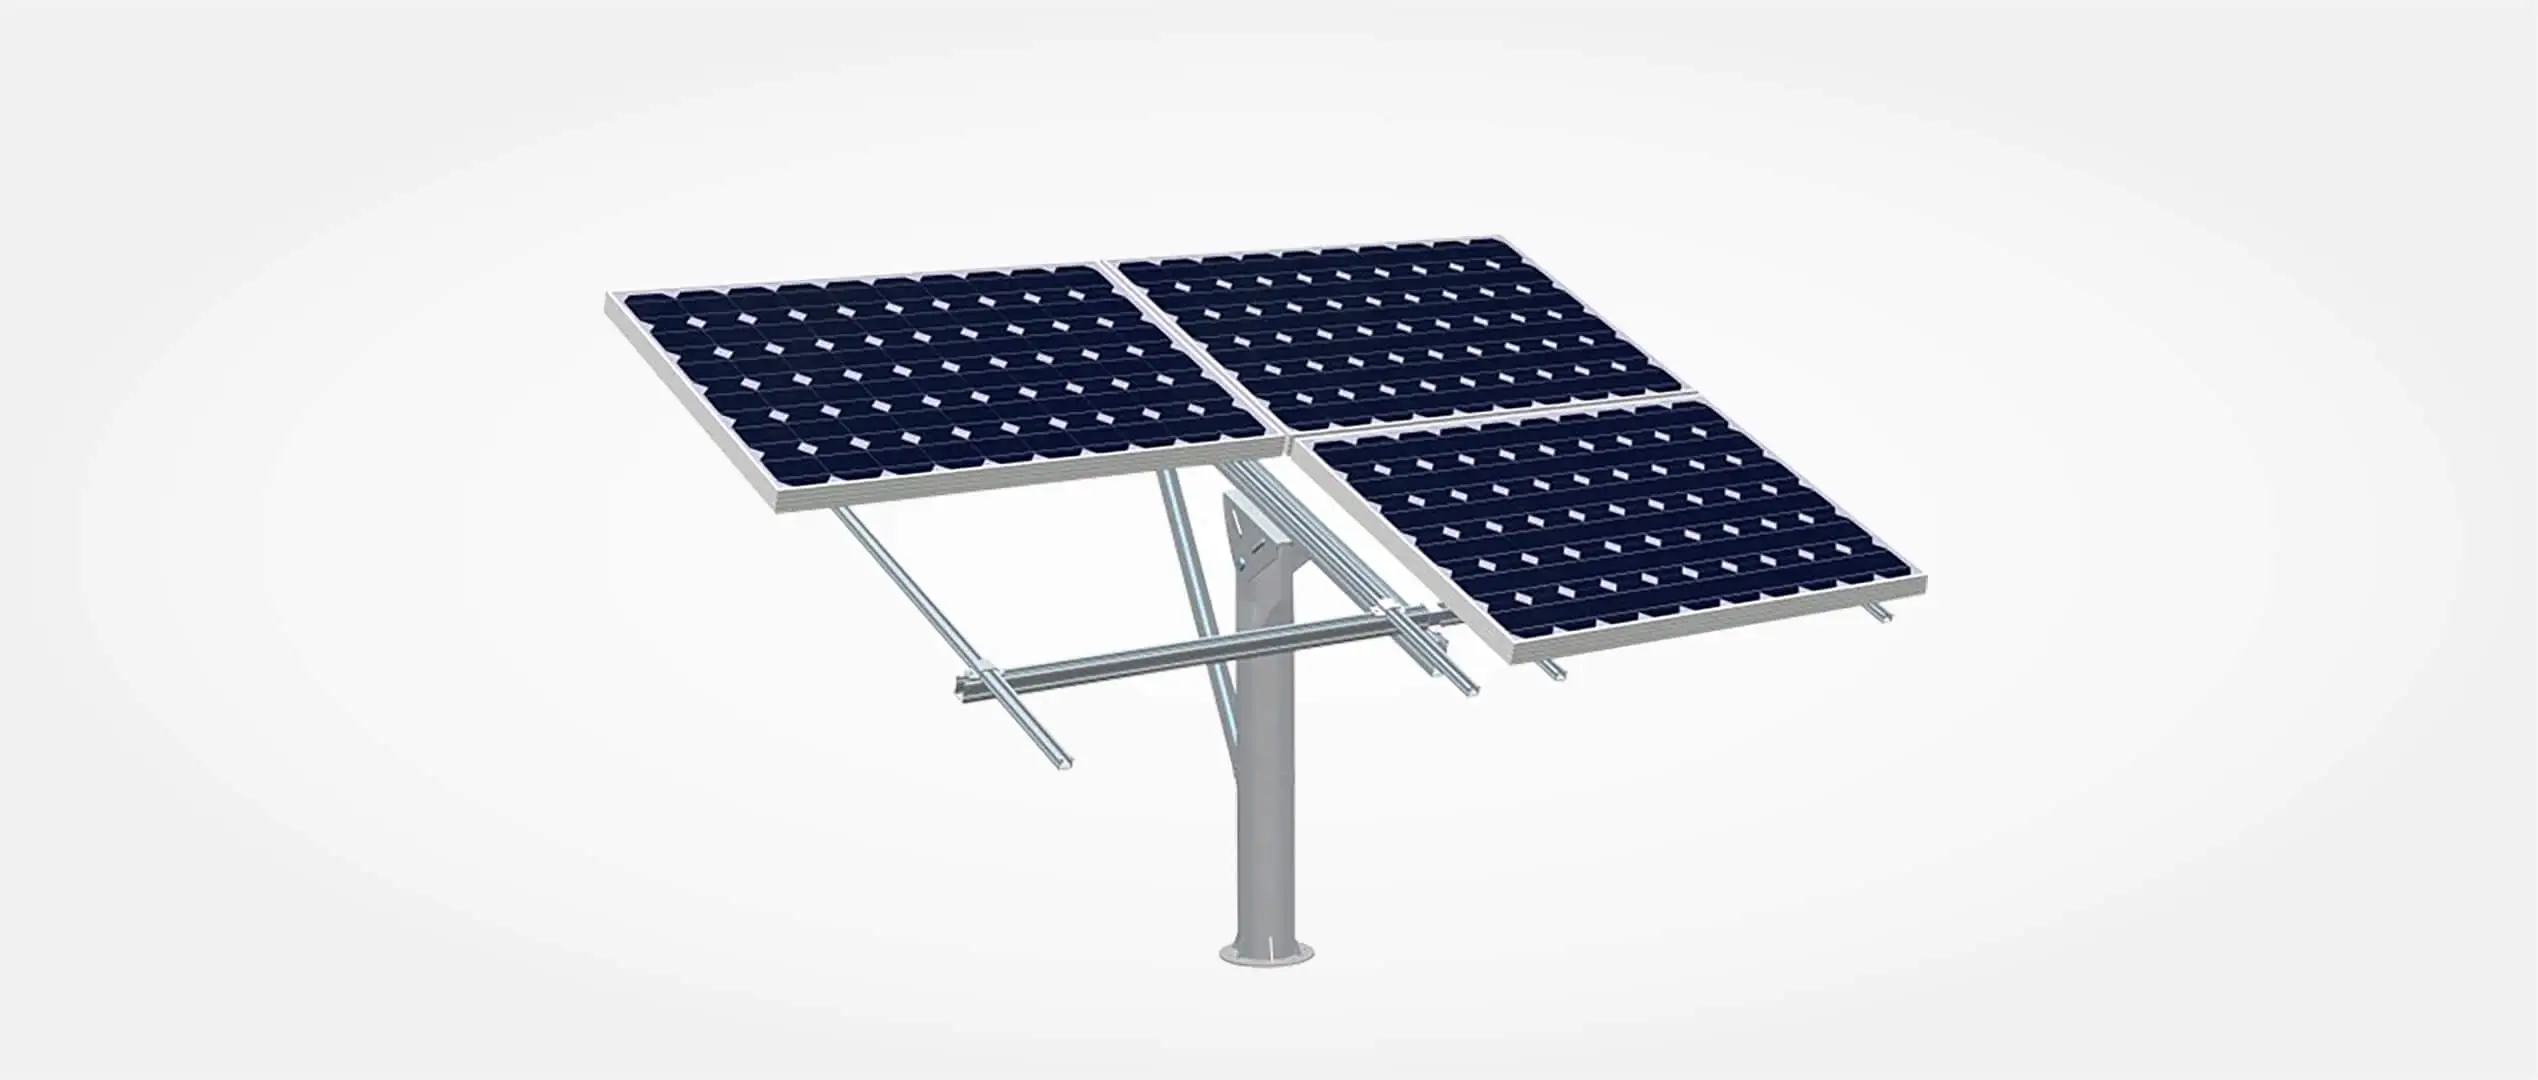 Pole Mounted Solar Structures